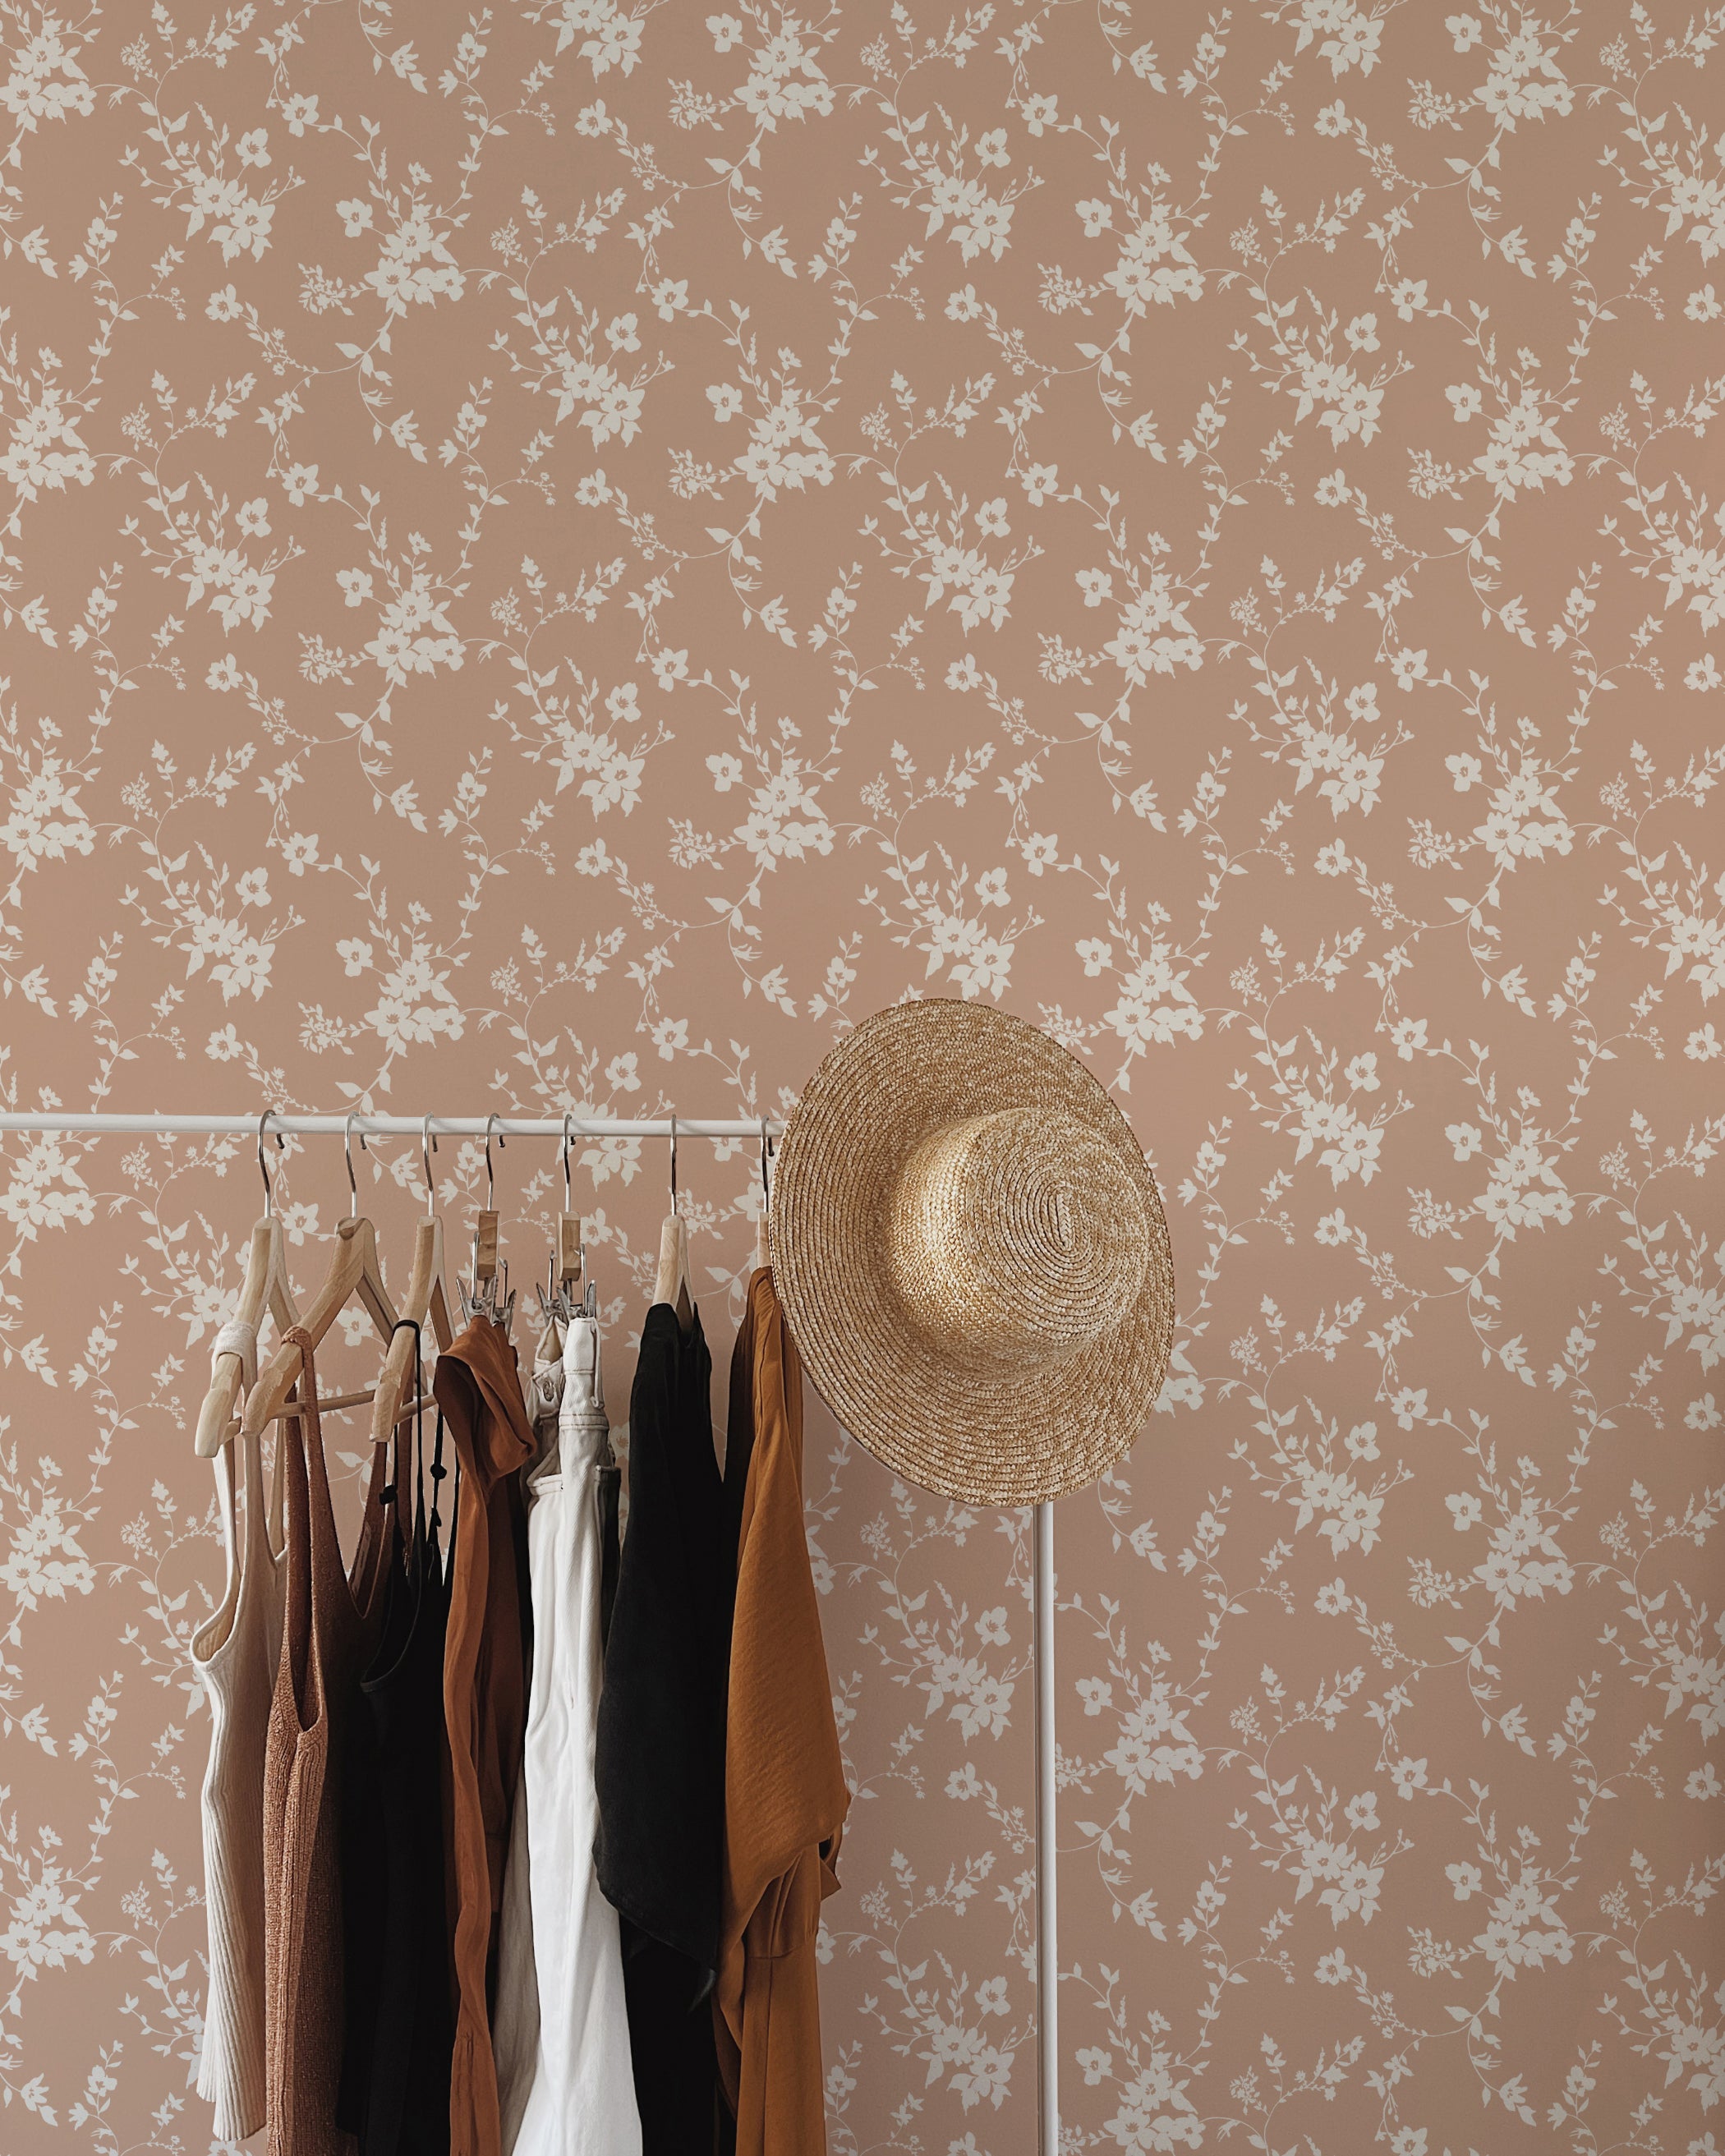 A stylish dressing area with a rack of fashionable clothes in natural tones, a straw hat, and a wall adorned with delicate pink floral wallpaper, creating an elegant and feminine ambiance.